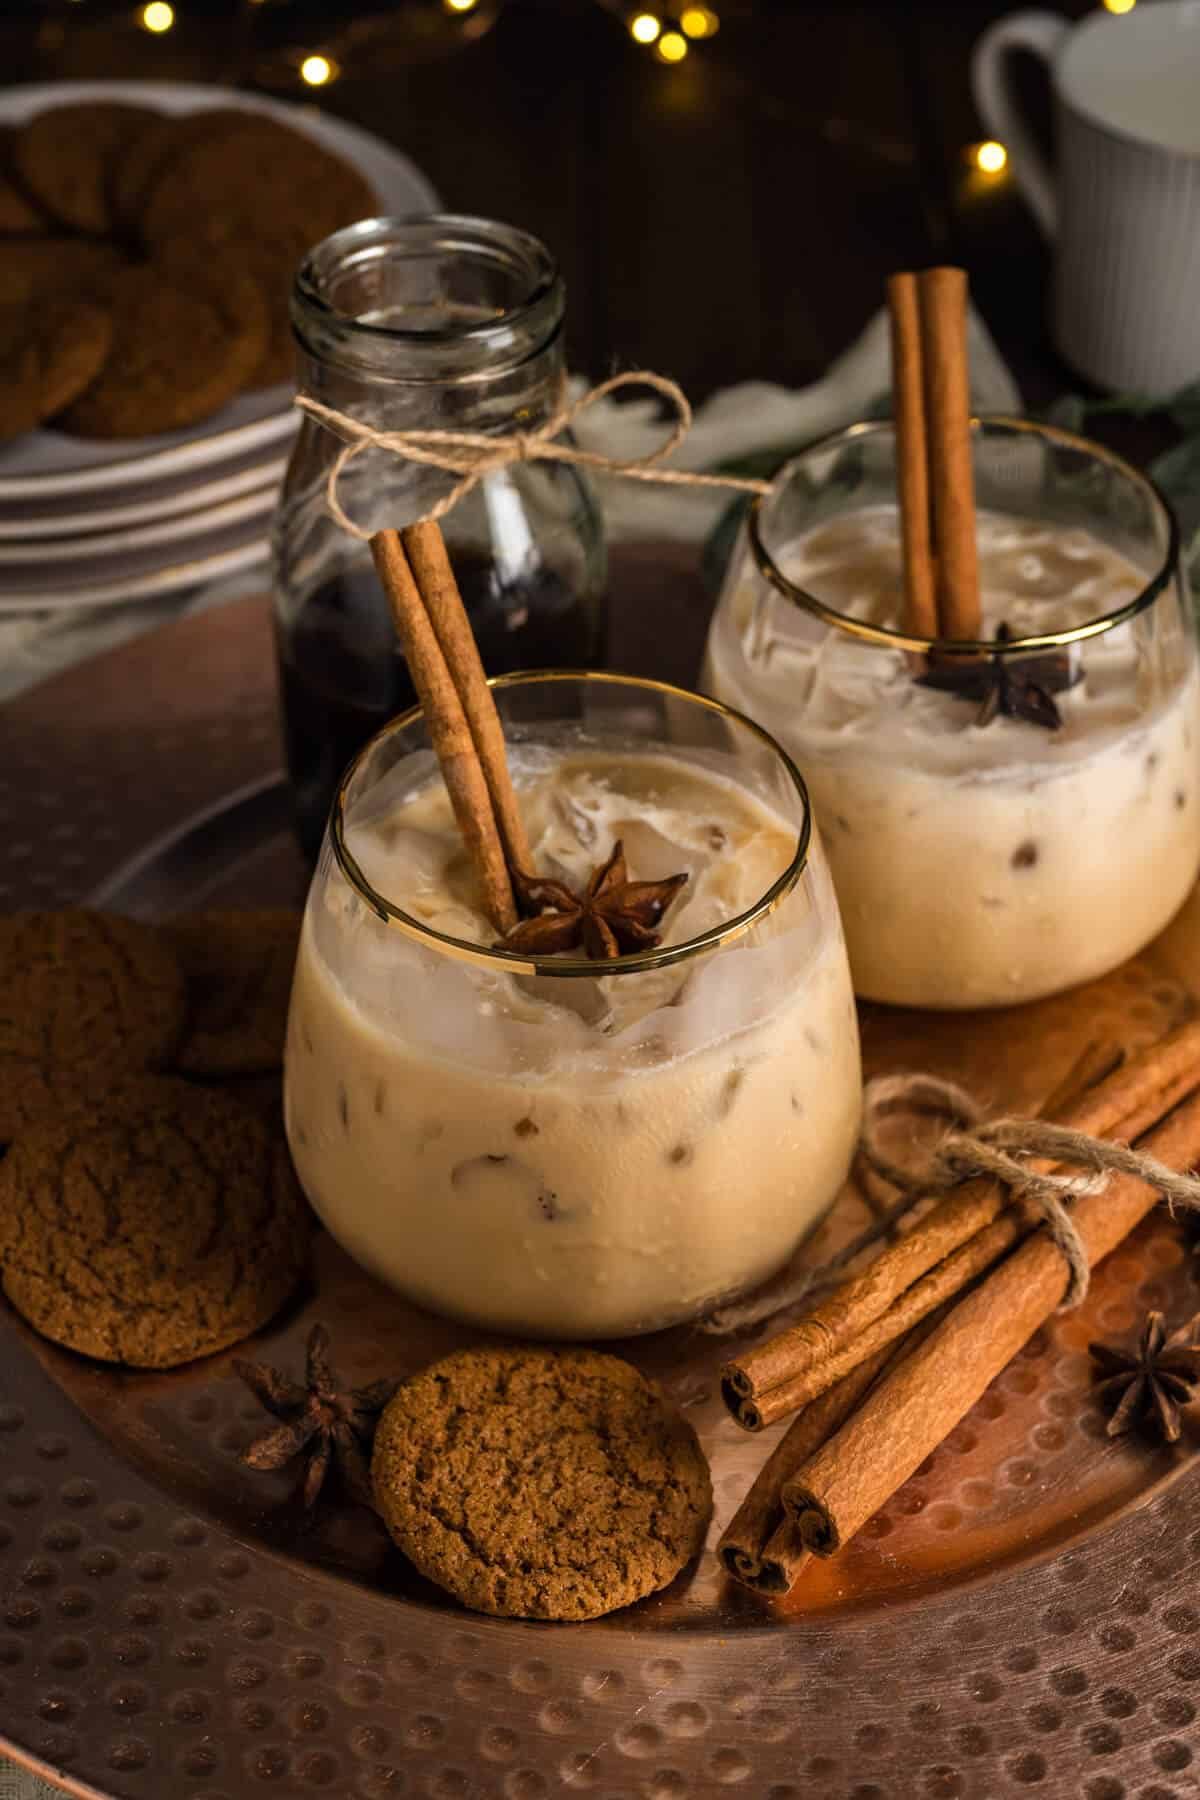 Two Gingerbread White Russian Mocktails in gold rim glasses, served on a platter surrounded by gingersnap cookies and cinnamon sticks.